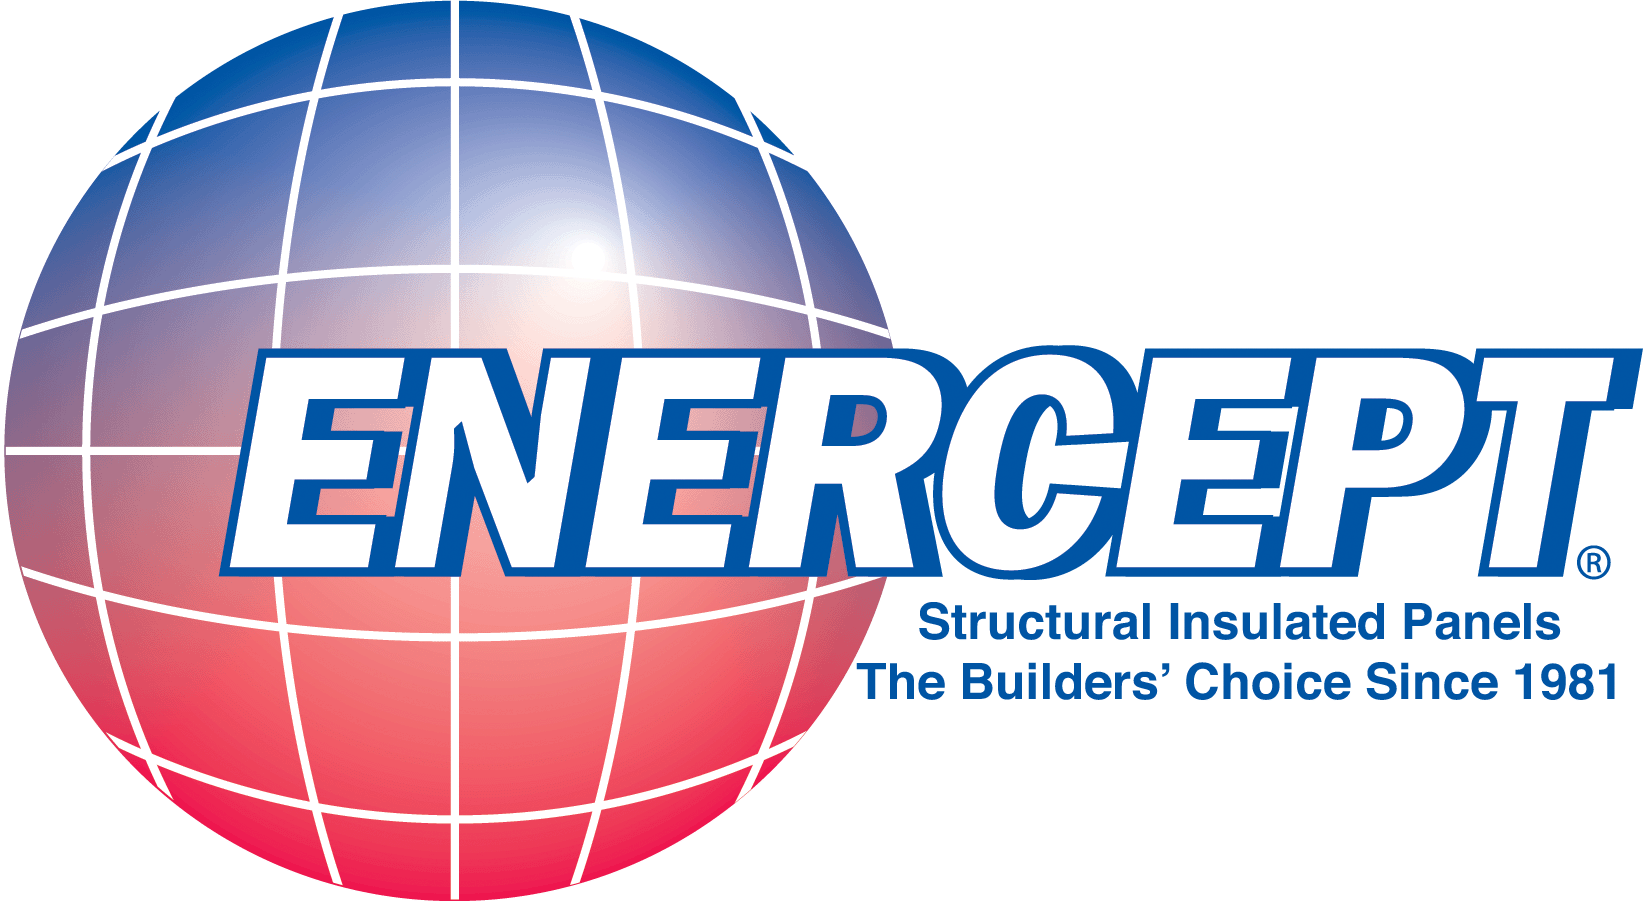 Enercept Structural Insulated Panels